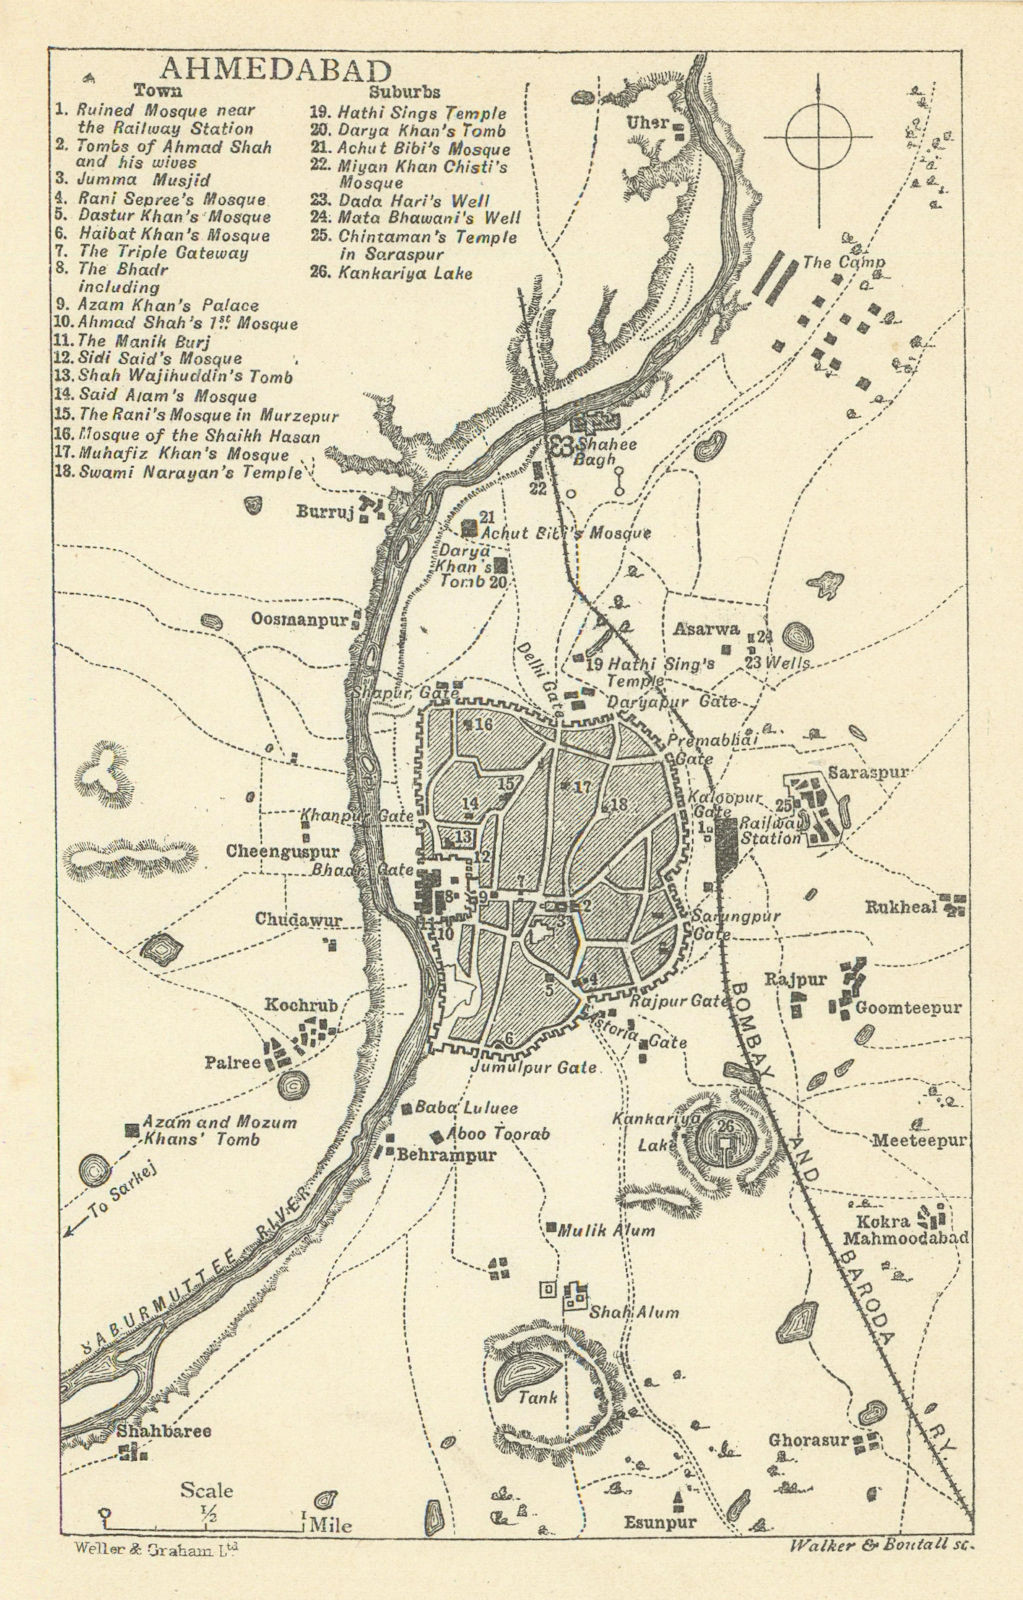 Associate Product INDIA. Ahmedabad city plan. Palaces mosques temples tombs. Gujarat 1905 map